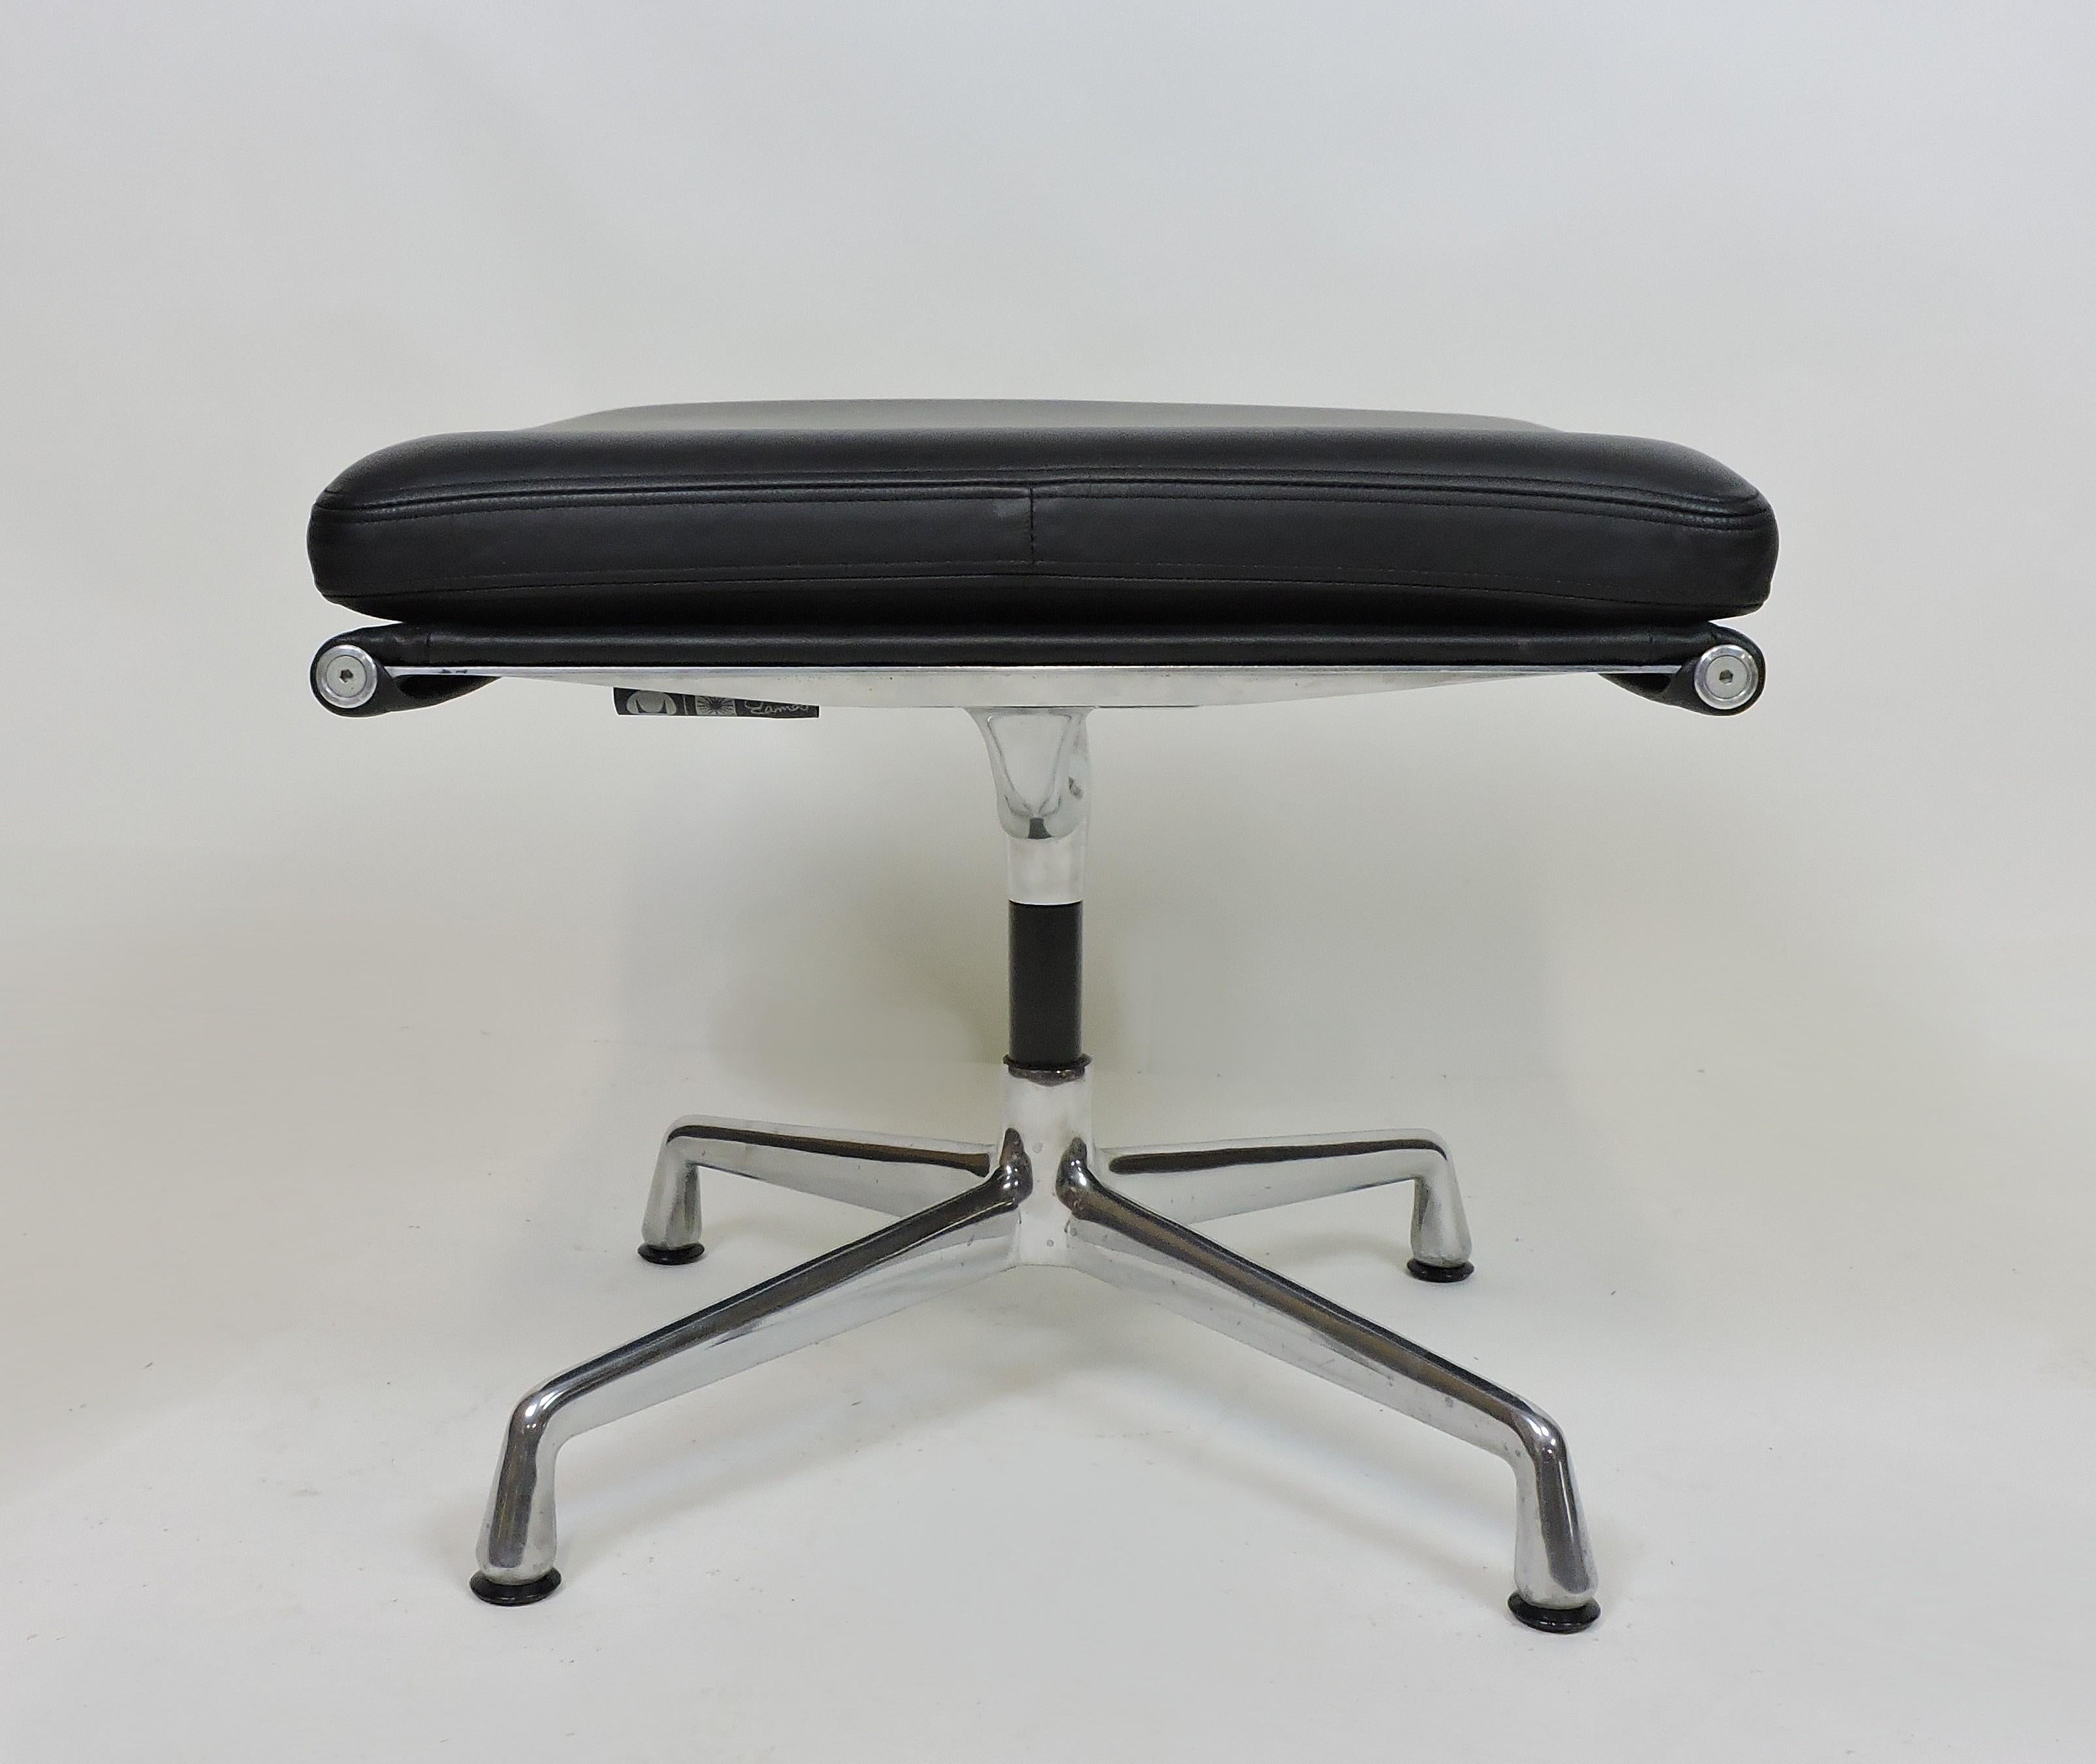 Classic footstool designed by Charles and Ray Eames as part of their Soft Pad Group. Similar to the Aluminum Group, this series has sewn-on cushions for added comfort. Originally designed in 1969, this was manufactured in 2011 by Herman Miller and